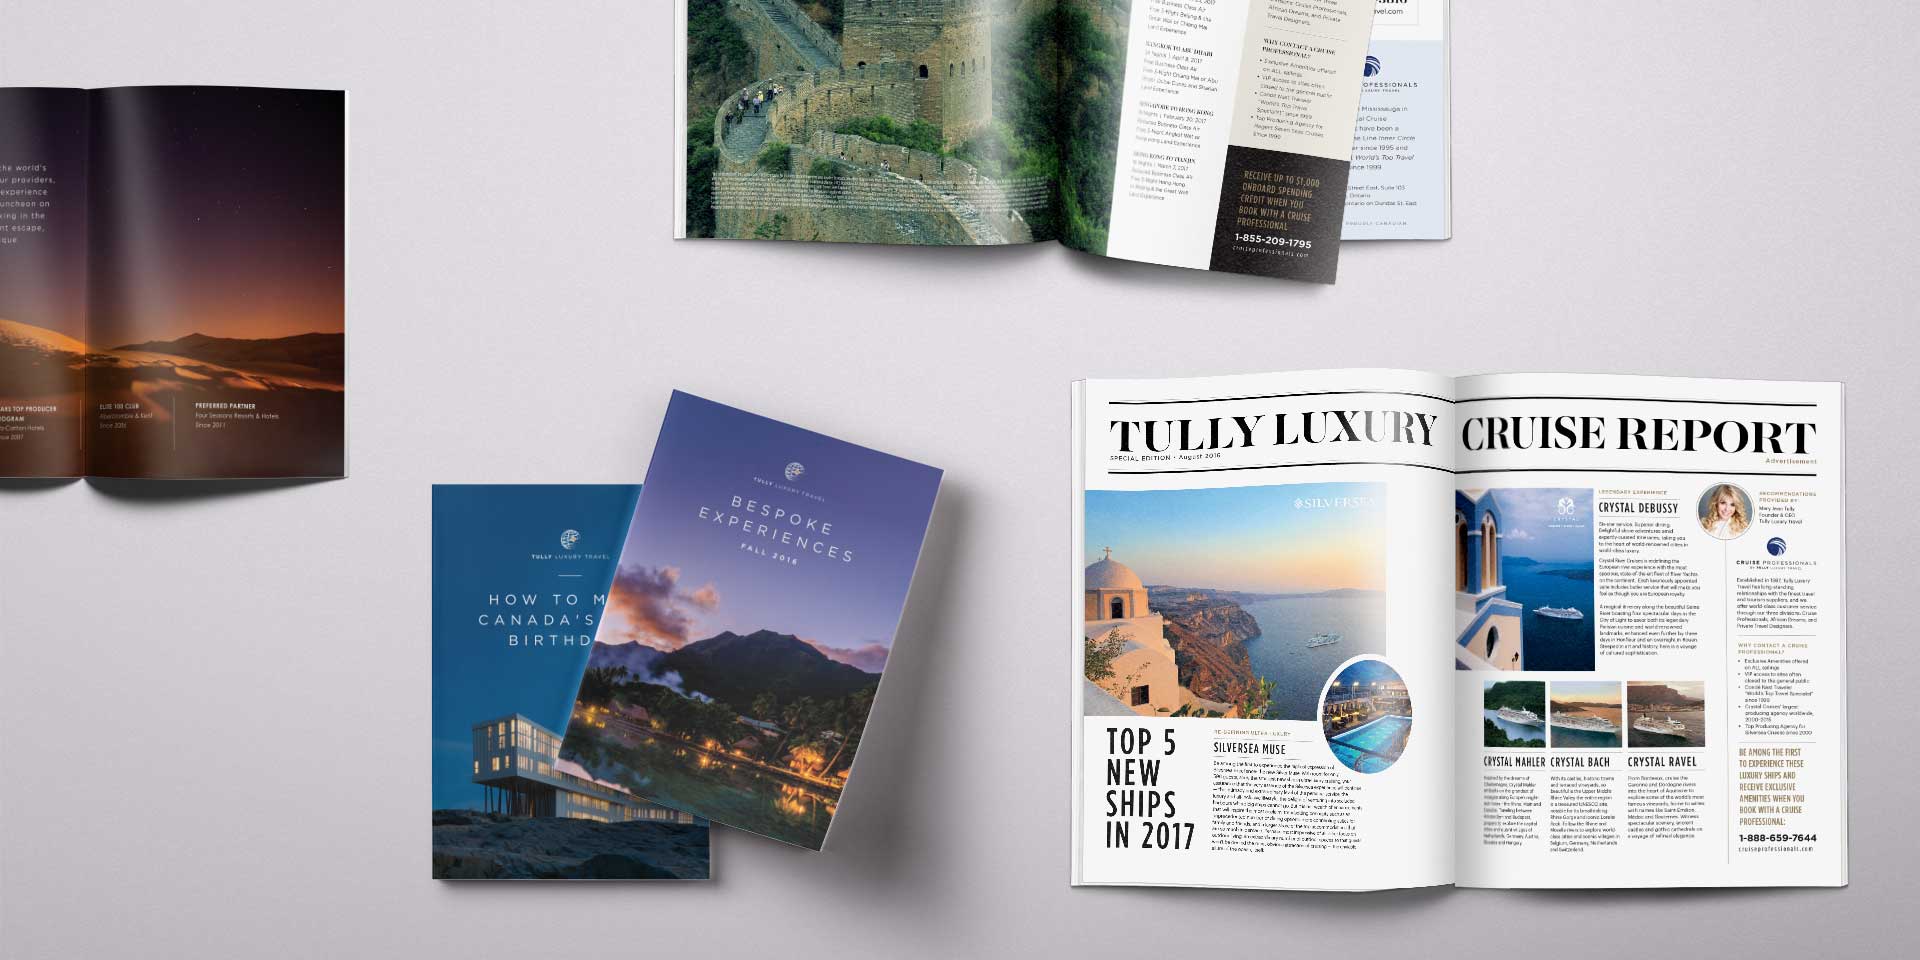 Various print pieces for Tully Luxury Travel: magazine ads, advertorial, direct mailers